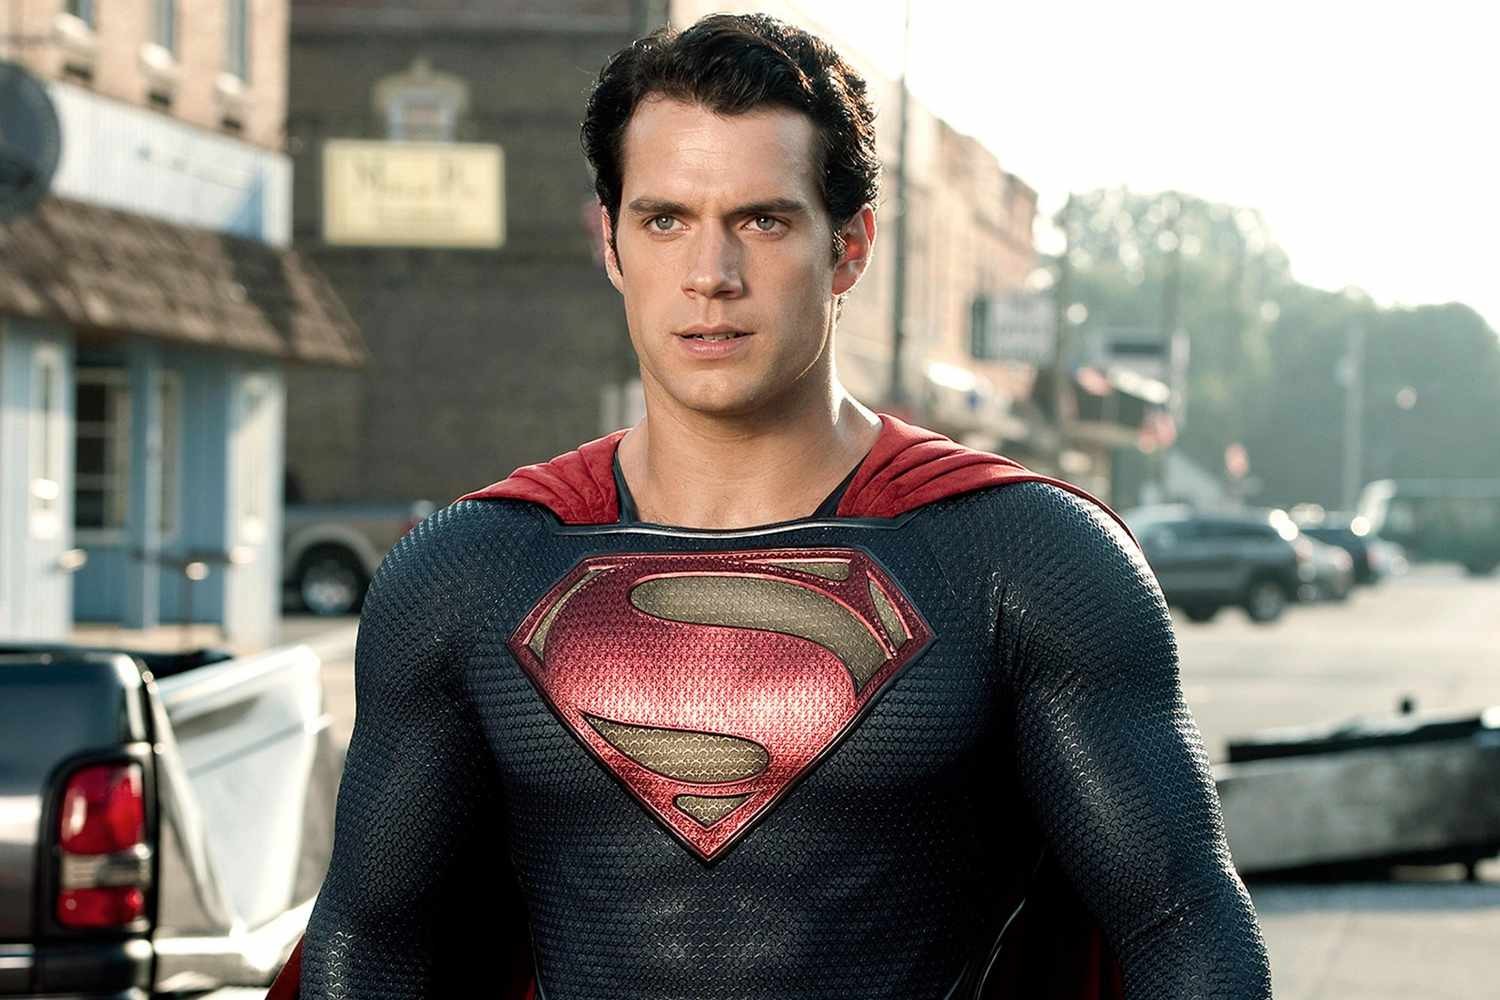 James Gunn's Superman will be different from Henry Cavill's treatment of the character